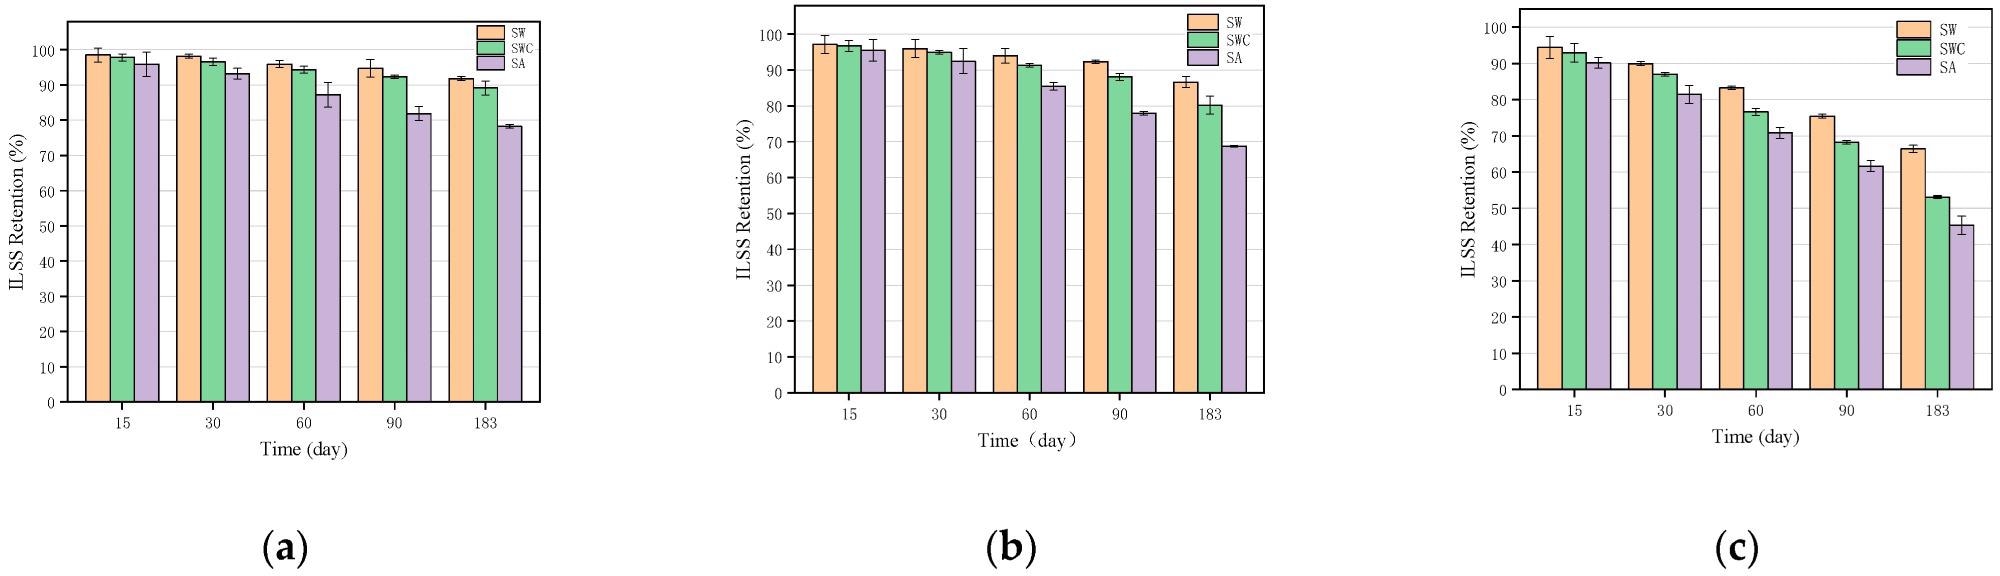 Comparison of ILSS retention of GFRP bars in three environments: (a) 25 °C; (b) 40 °C; (c) 60 °C.